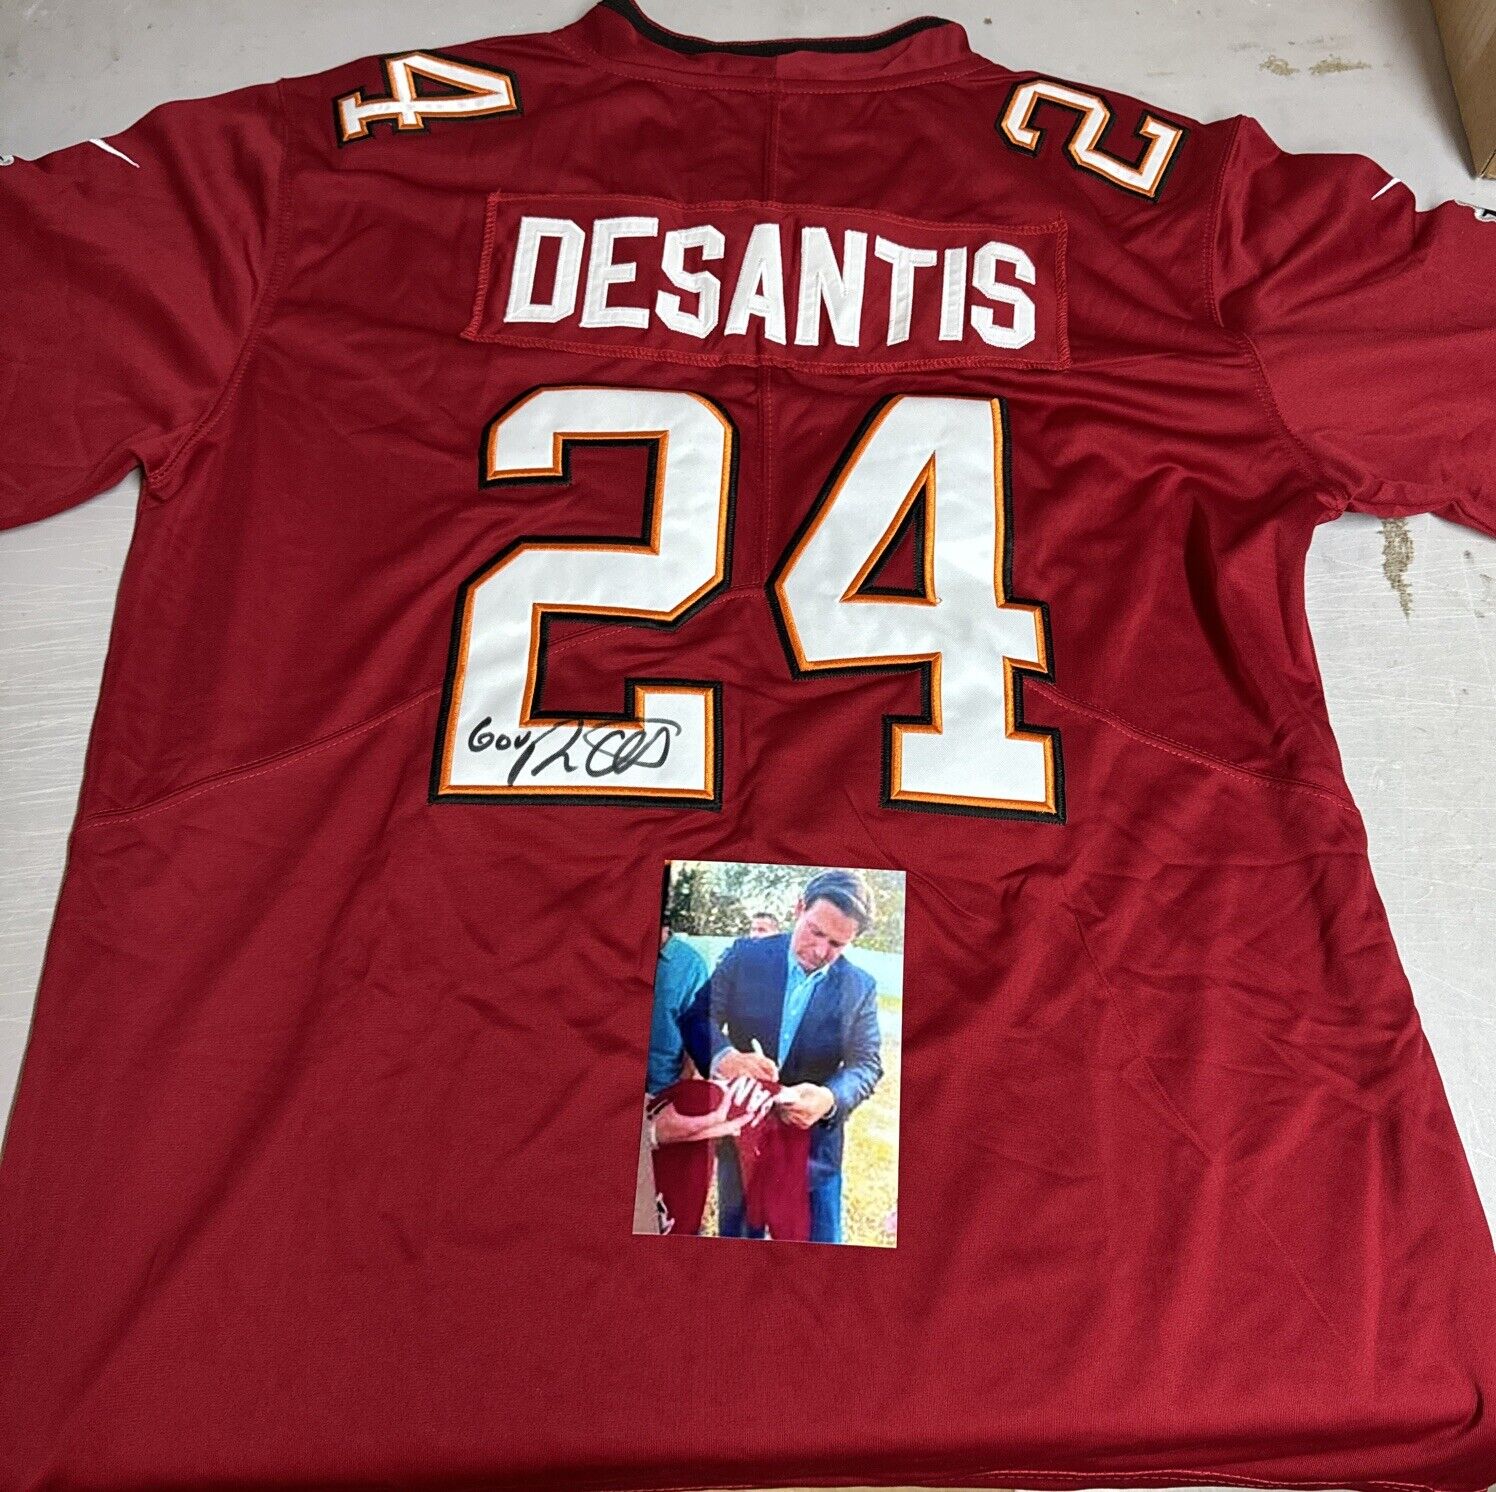 RON DESANTIS  SIGNED BUCCANEERS XL JERSEY w/Photo Proof Included 100% Authentic 